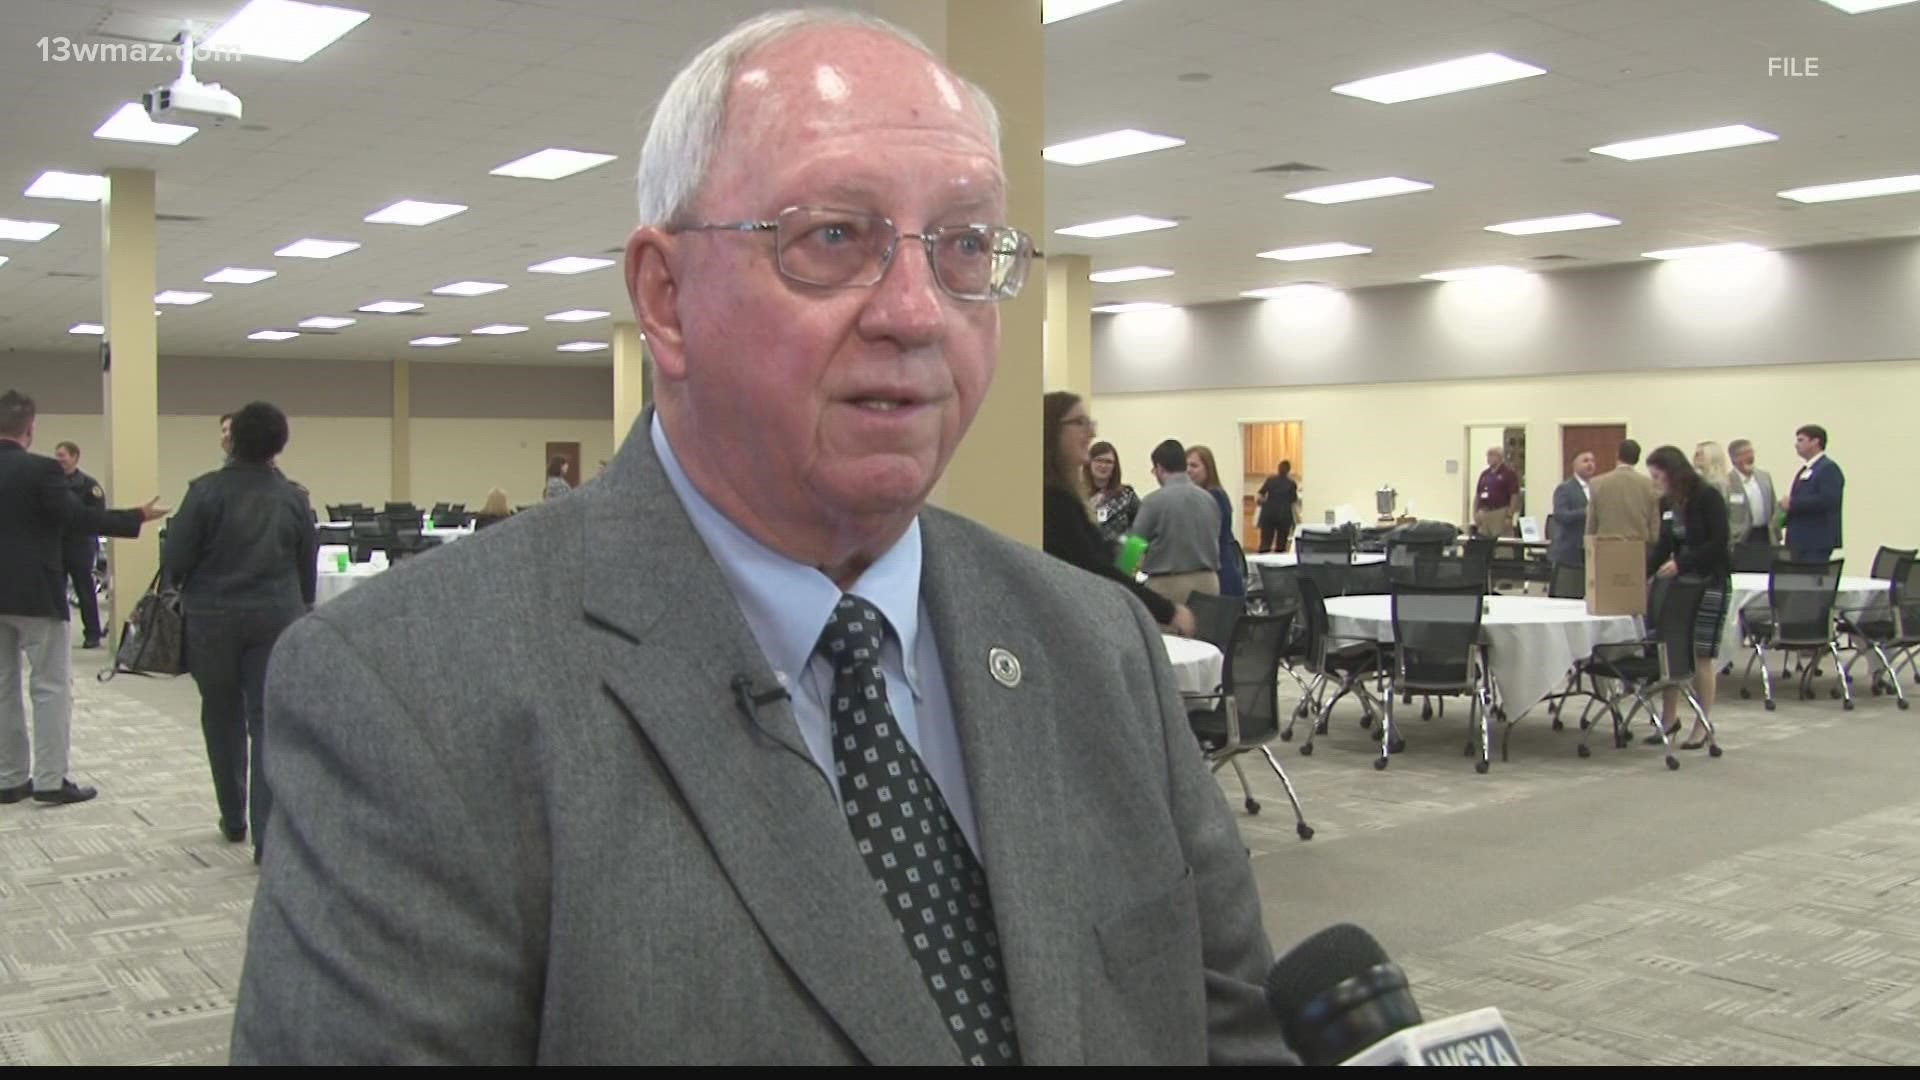 Houston County commission chairman Tommy Stalnaker announced at Tuesday night’s meeting that he will not be seeking re-election.